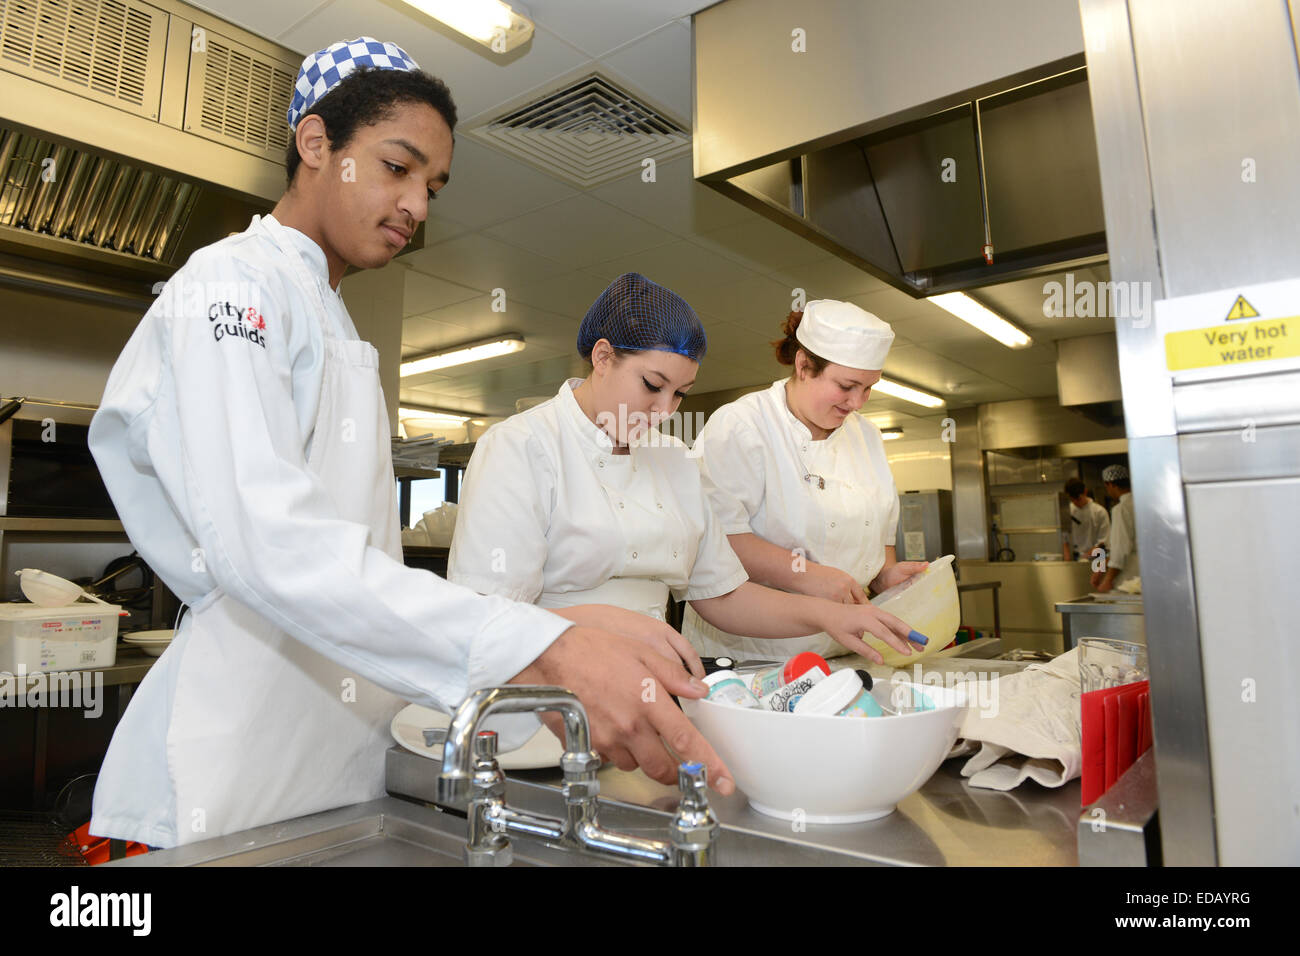 Catering students on City & Guilds course at Telford College of Arts and Technology Uk Stock Photo